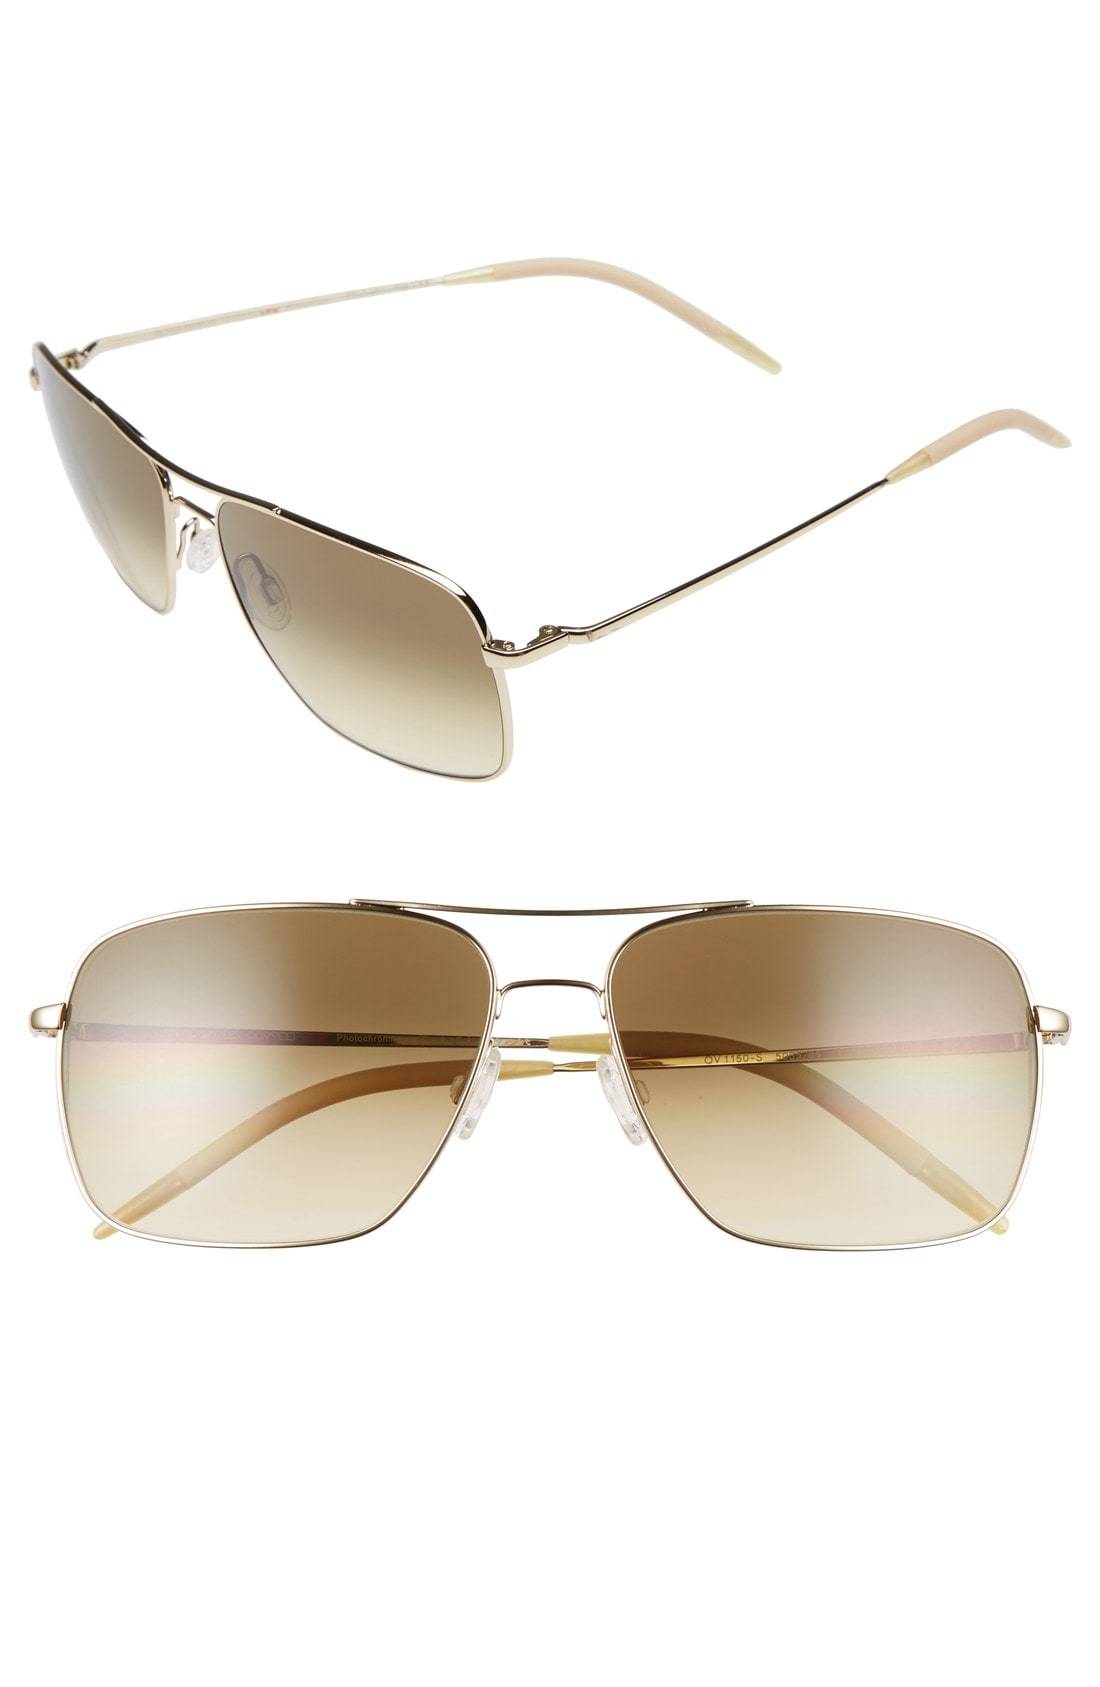 Oliver Peoples Clifton 58mm Aviator Sunglasses, $266 | Nordstrom | Lookastic